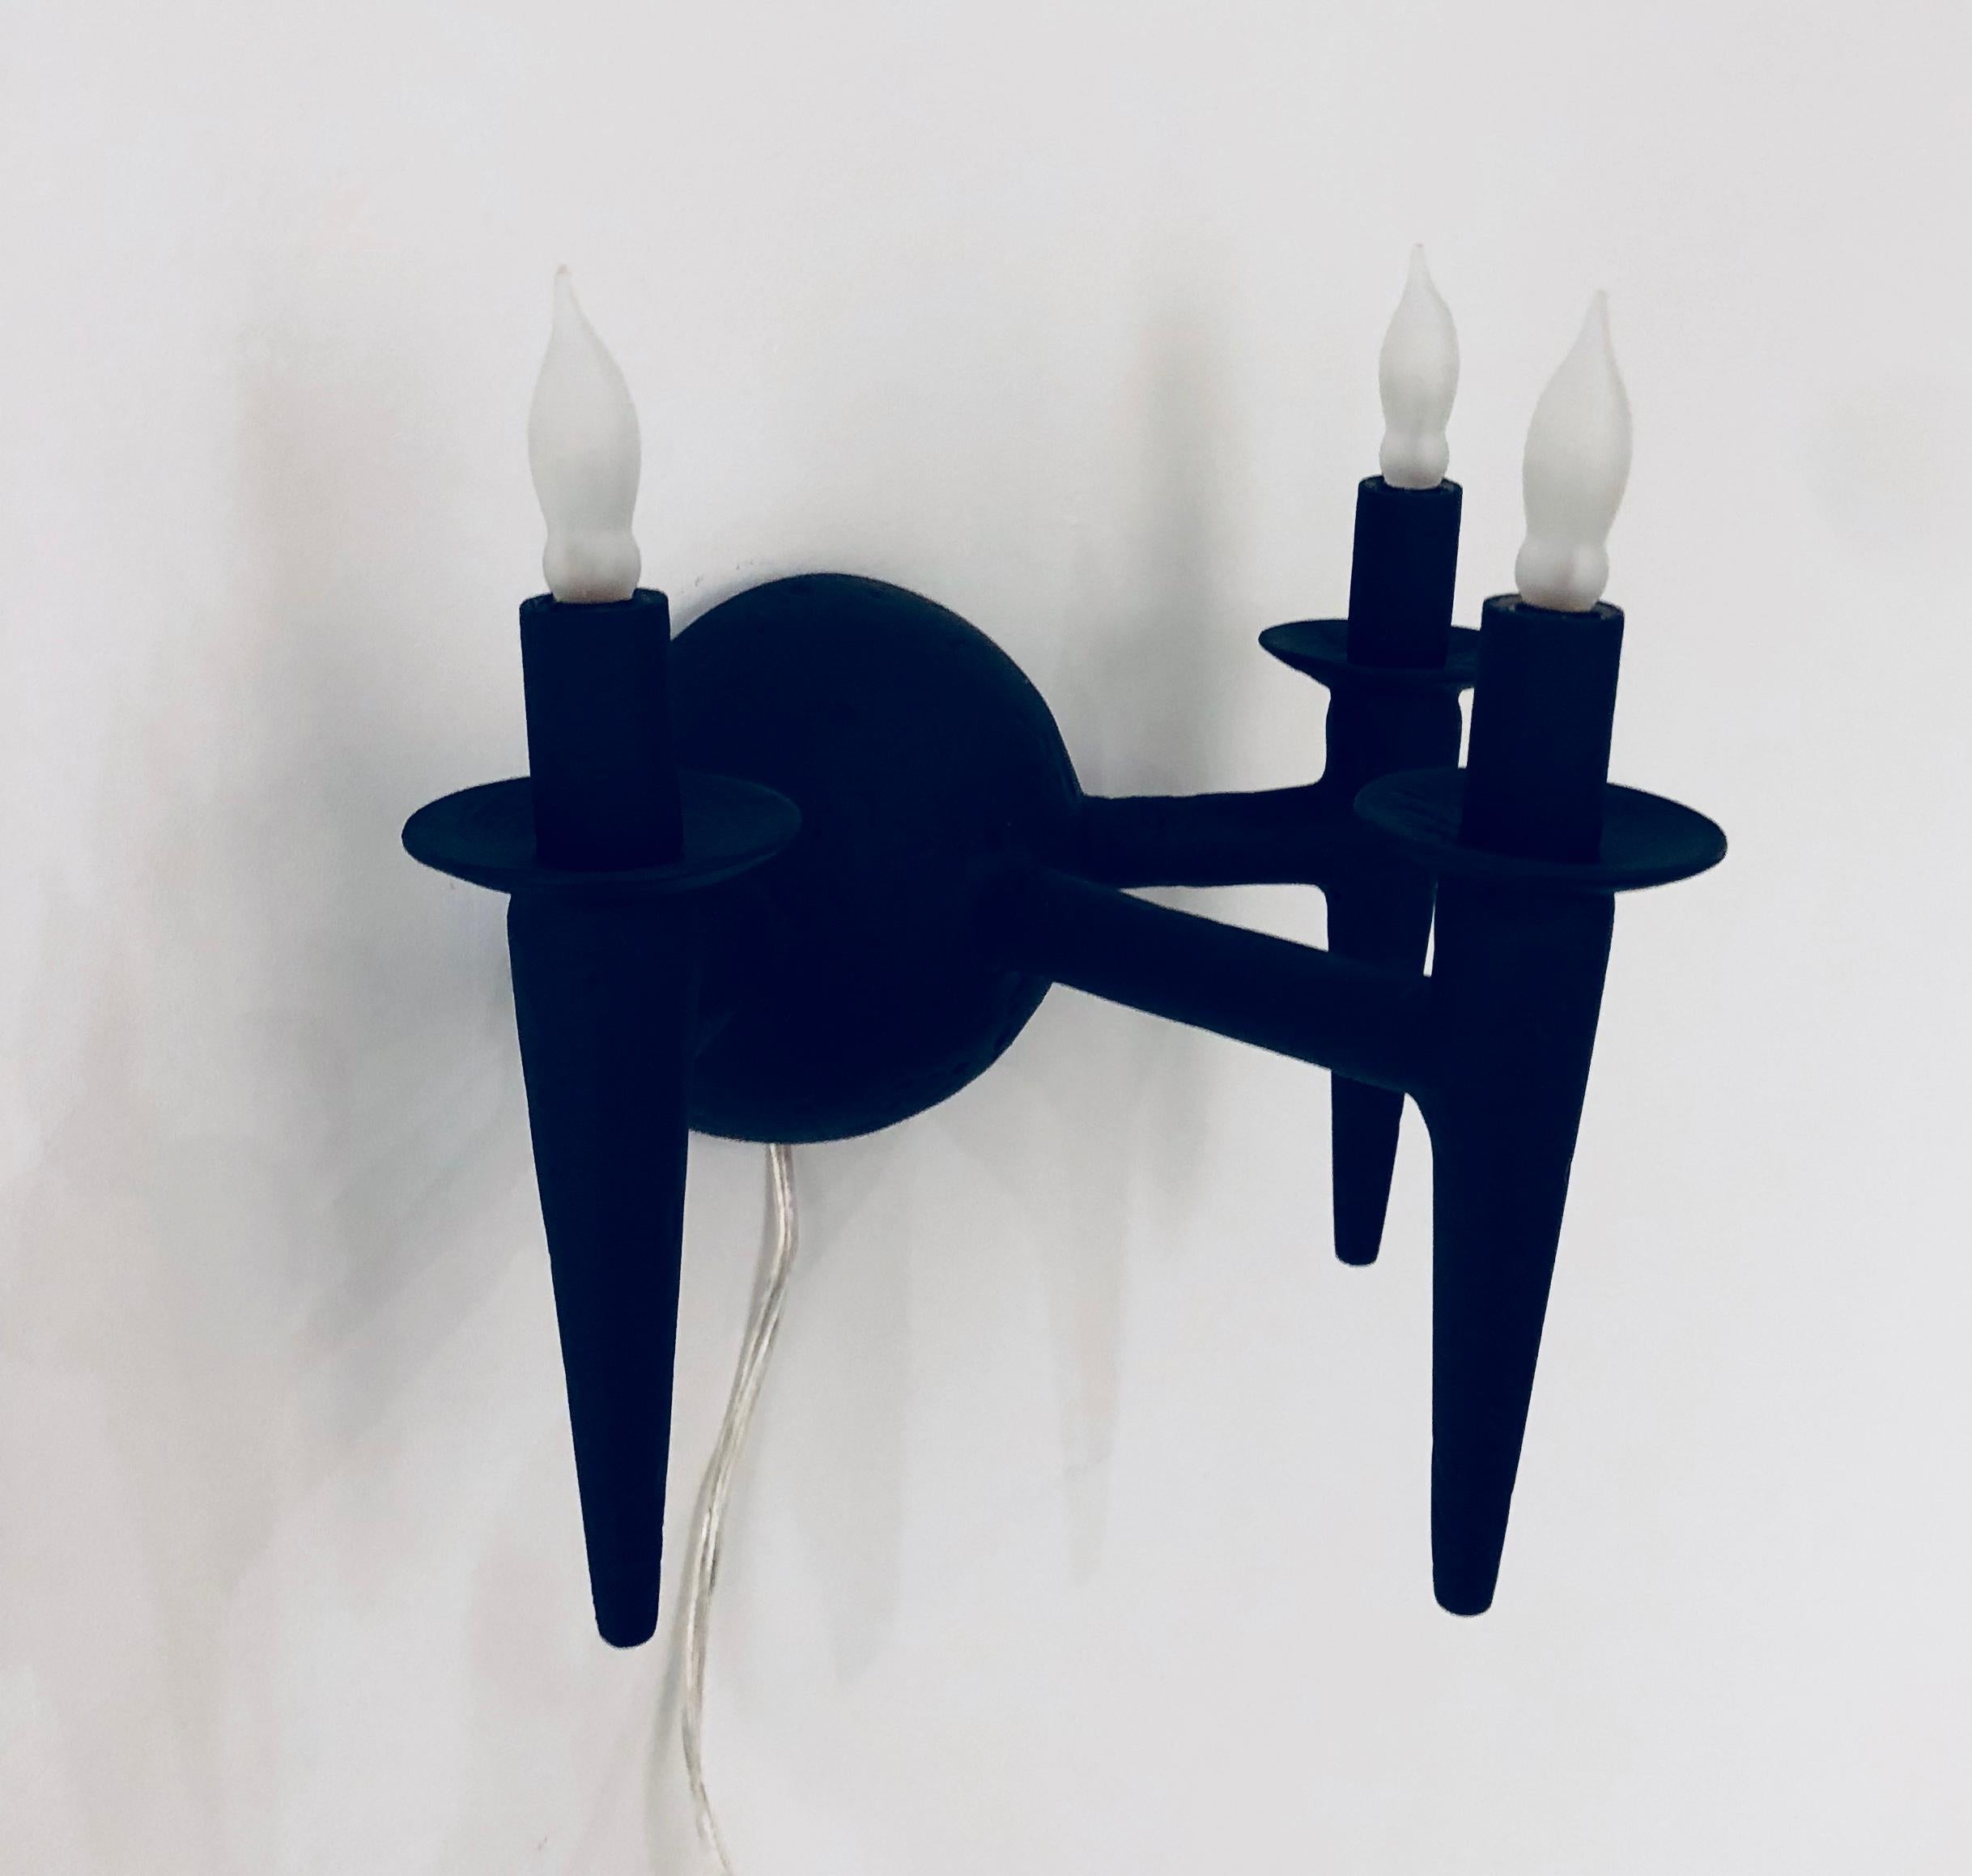 Two wall sconce with plaster finish. Fixture uses three candelabra based bulbs, Max wattage 60 each. Lights fits on a standard J box. The sconces have a custom matte black finish. Custom sconces can have custom paint finishes specified. Can be sold